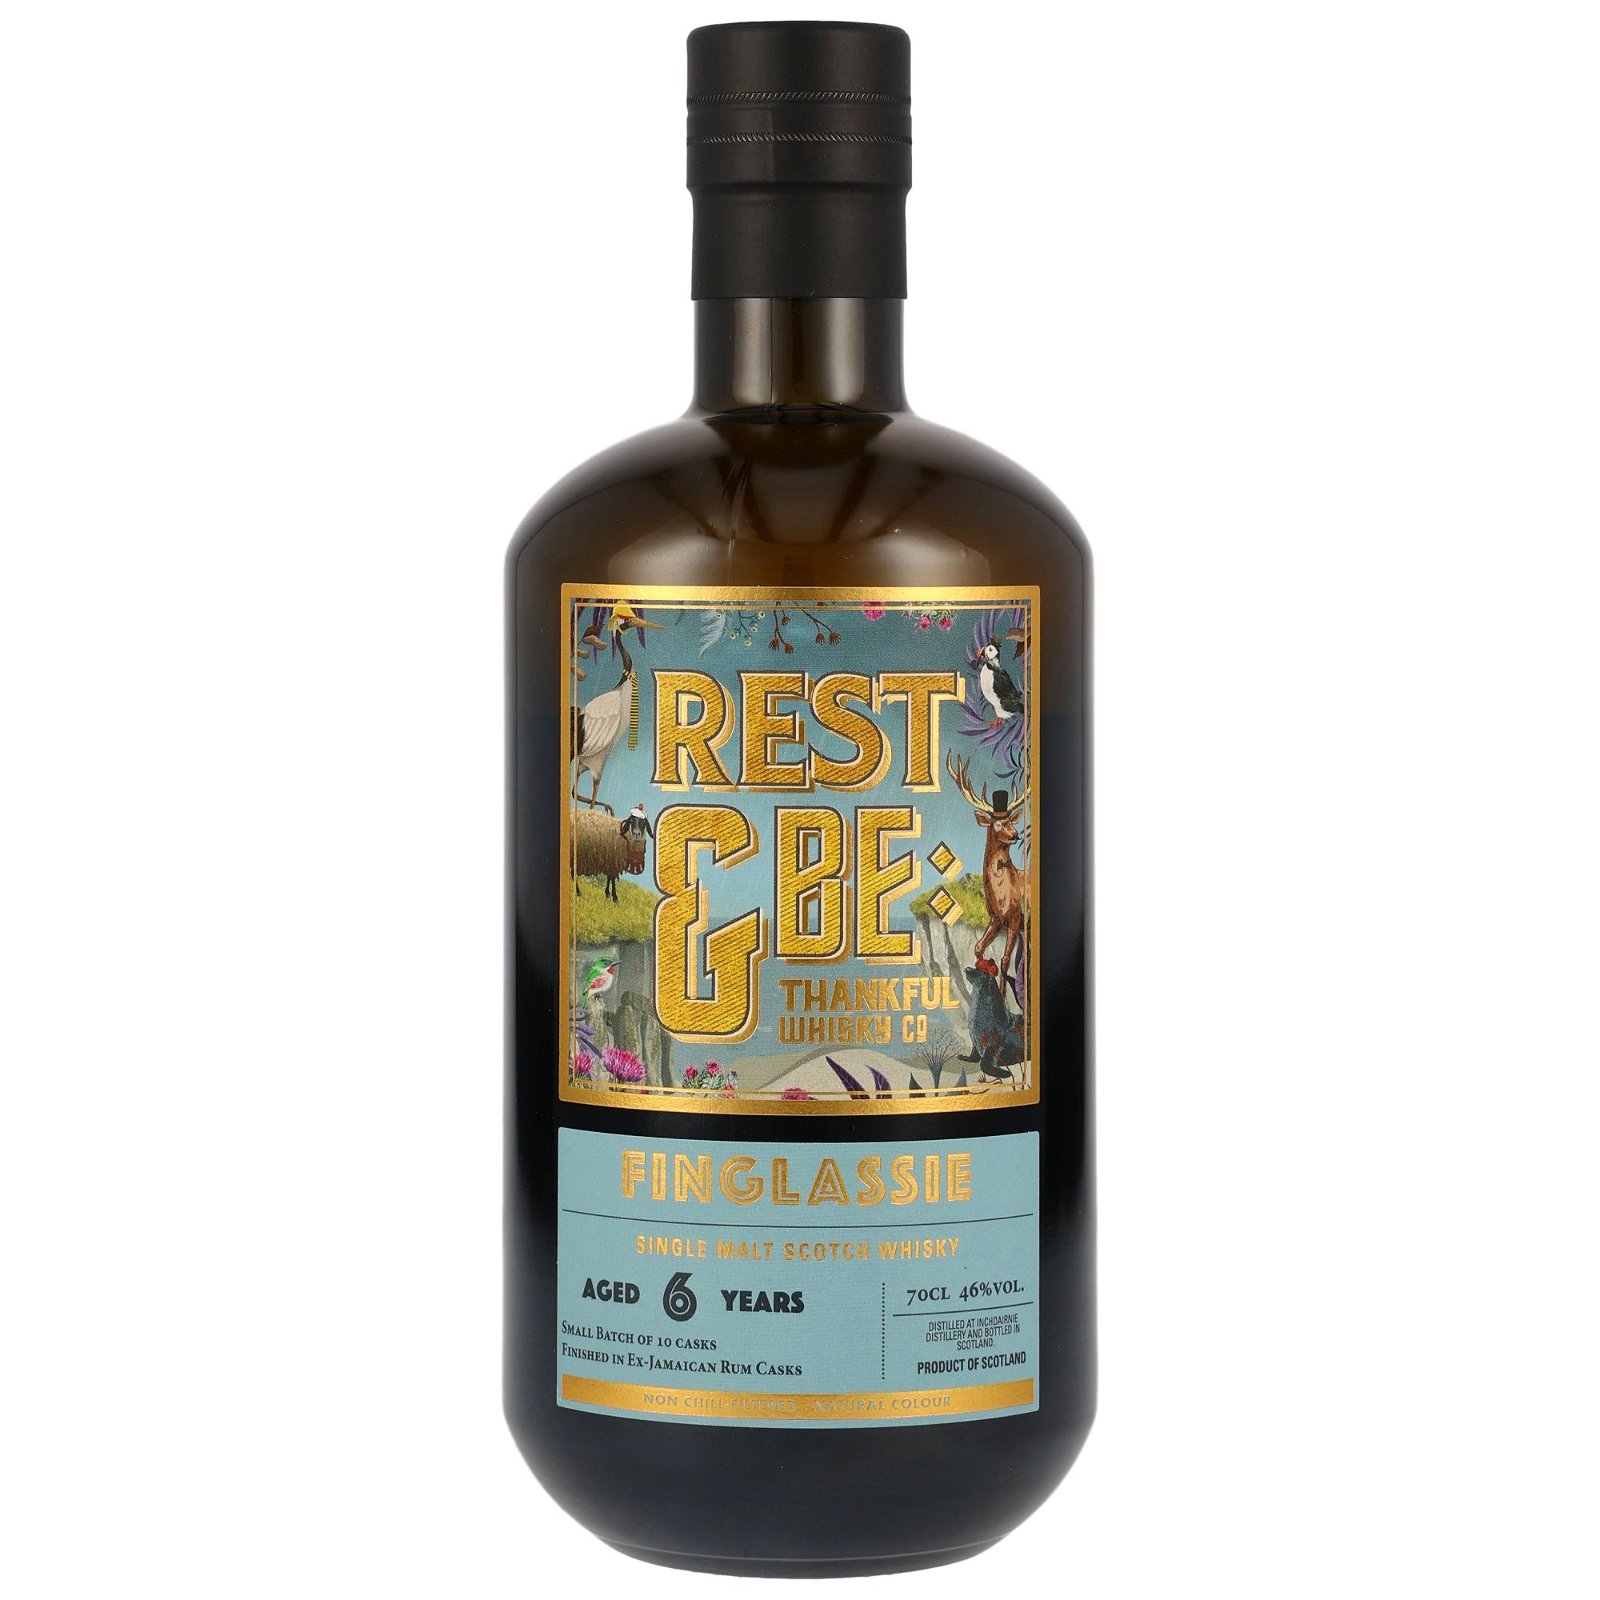 Finglassie 2017/2023 - 6 Jahre Small Batch Jamaican Rum Cask Finish (Rest & Be Thankful)